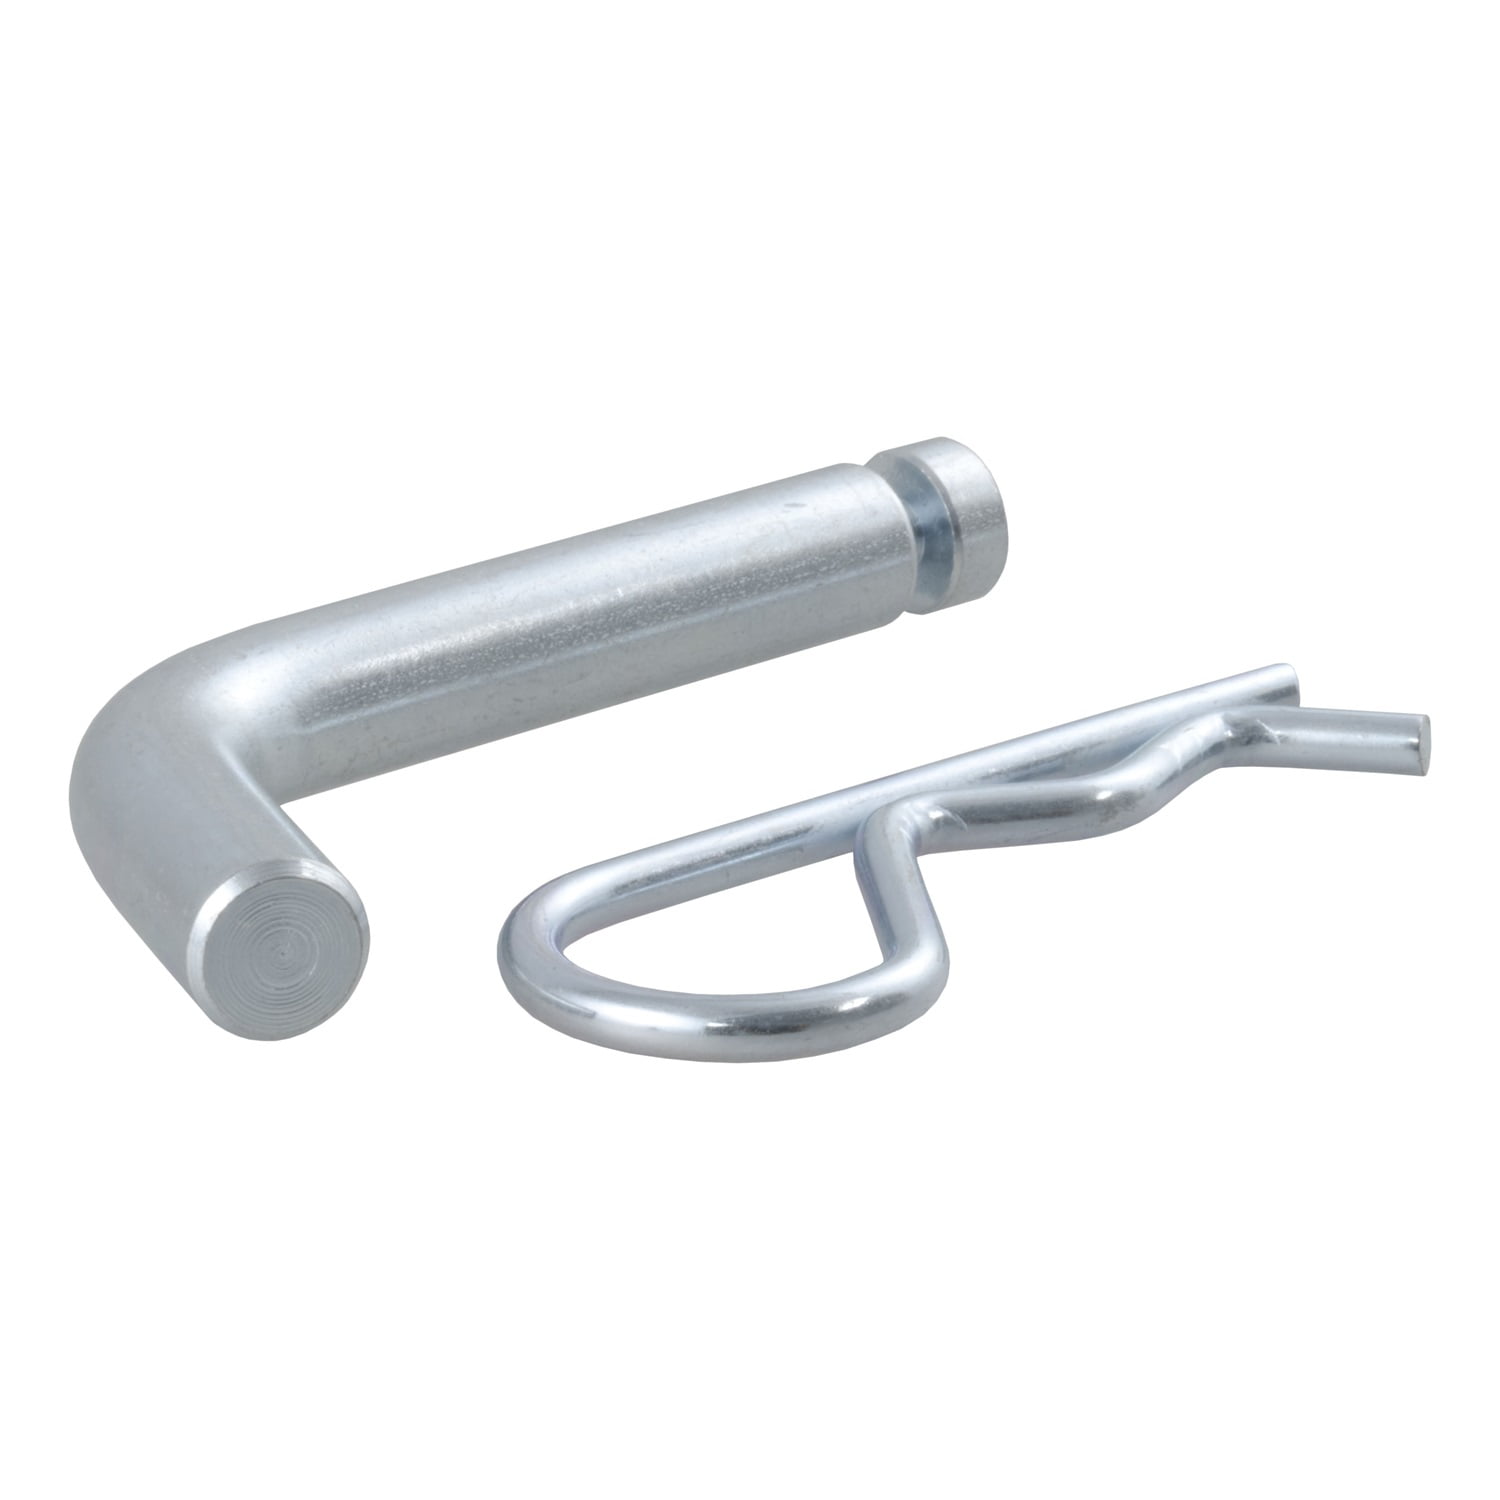 SpeeCo  Zinc Plated  Bent Hitch Pin  0.625 in dia. L 5/8 in W x 3 in 